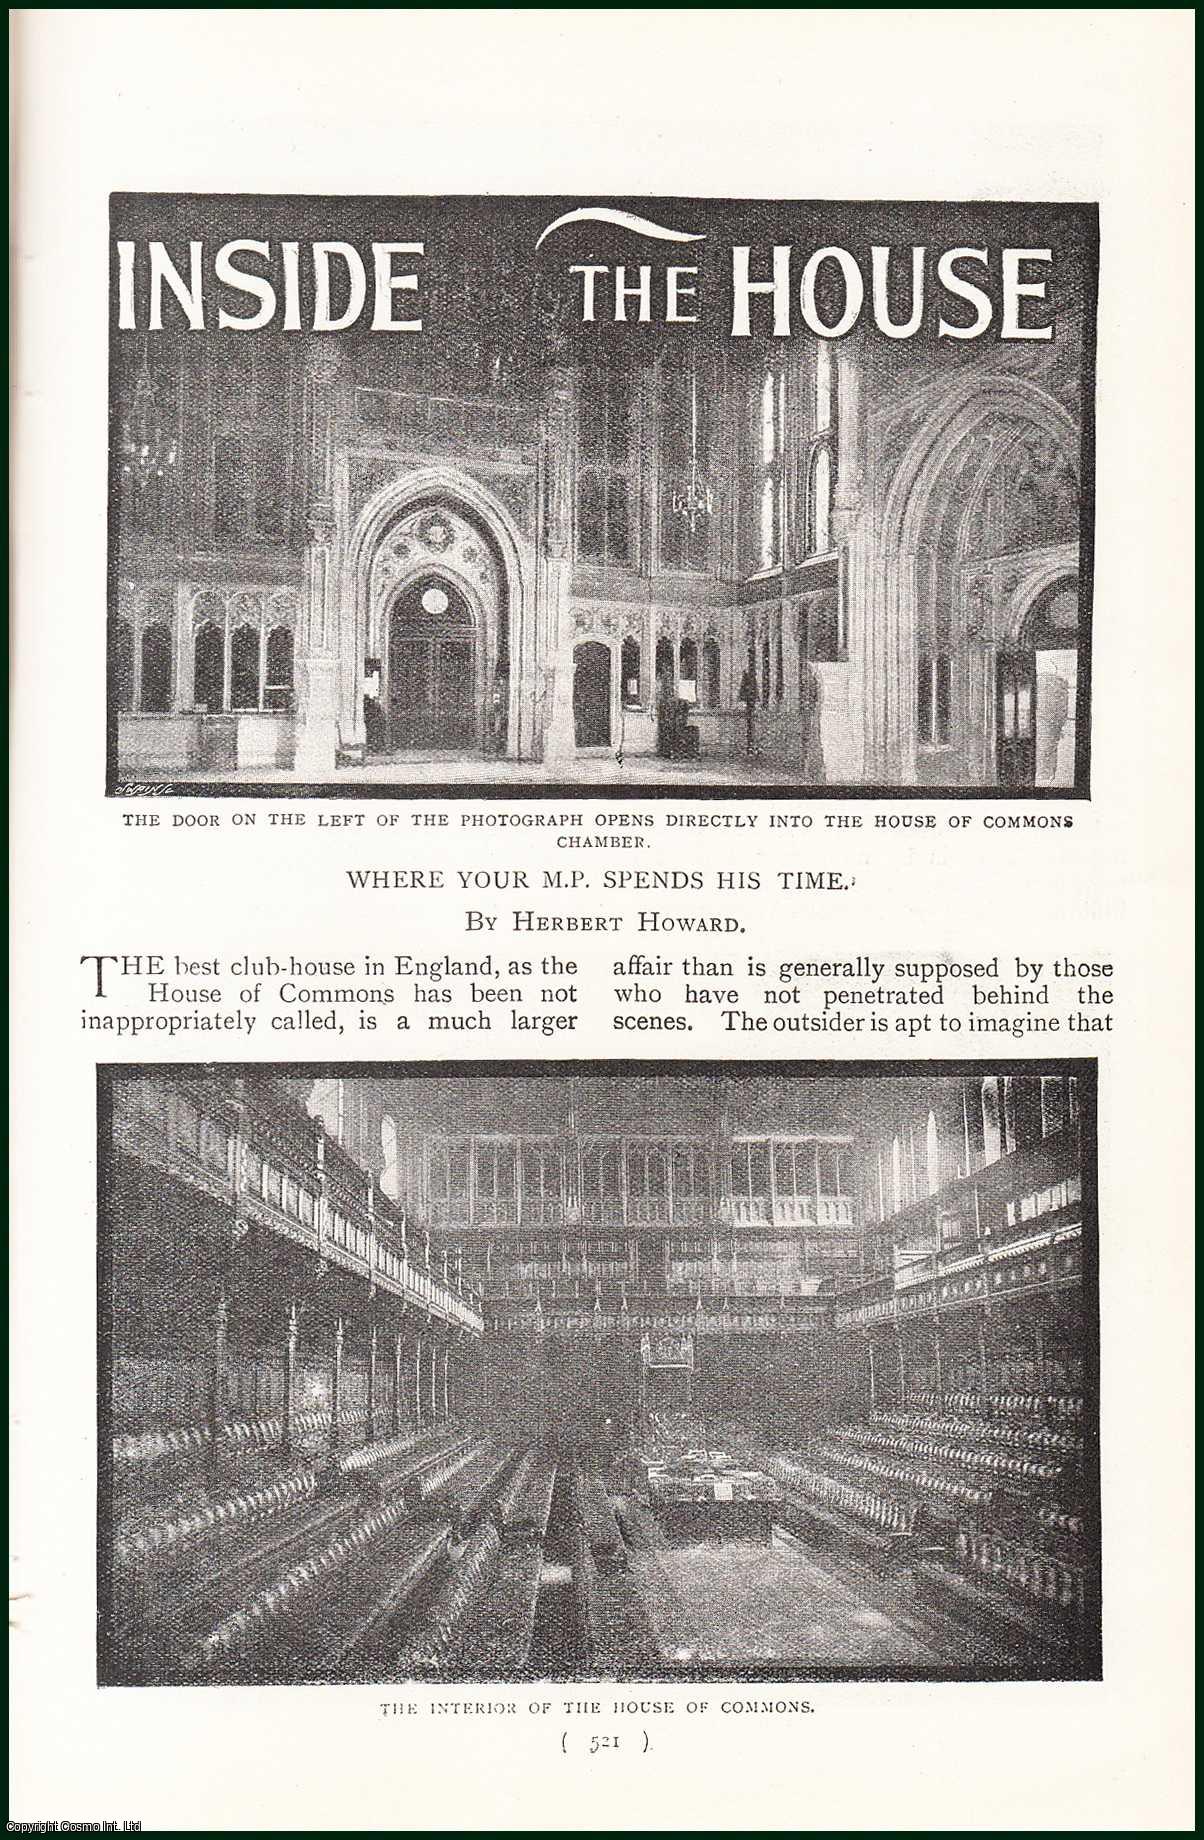 Herbert Howard - Inside The House of Commons, Where Your M.P. Spends His Time. An uncommon original article from the Harmsworth London Magazine, 1901.